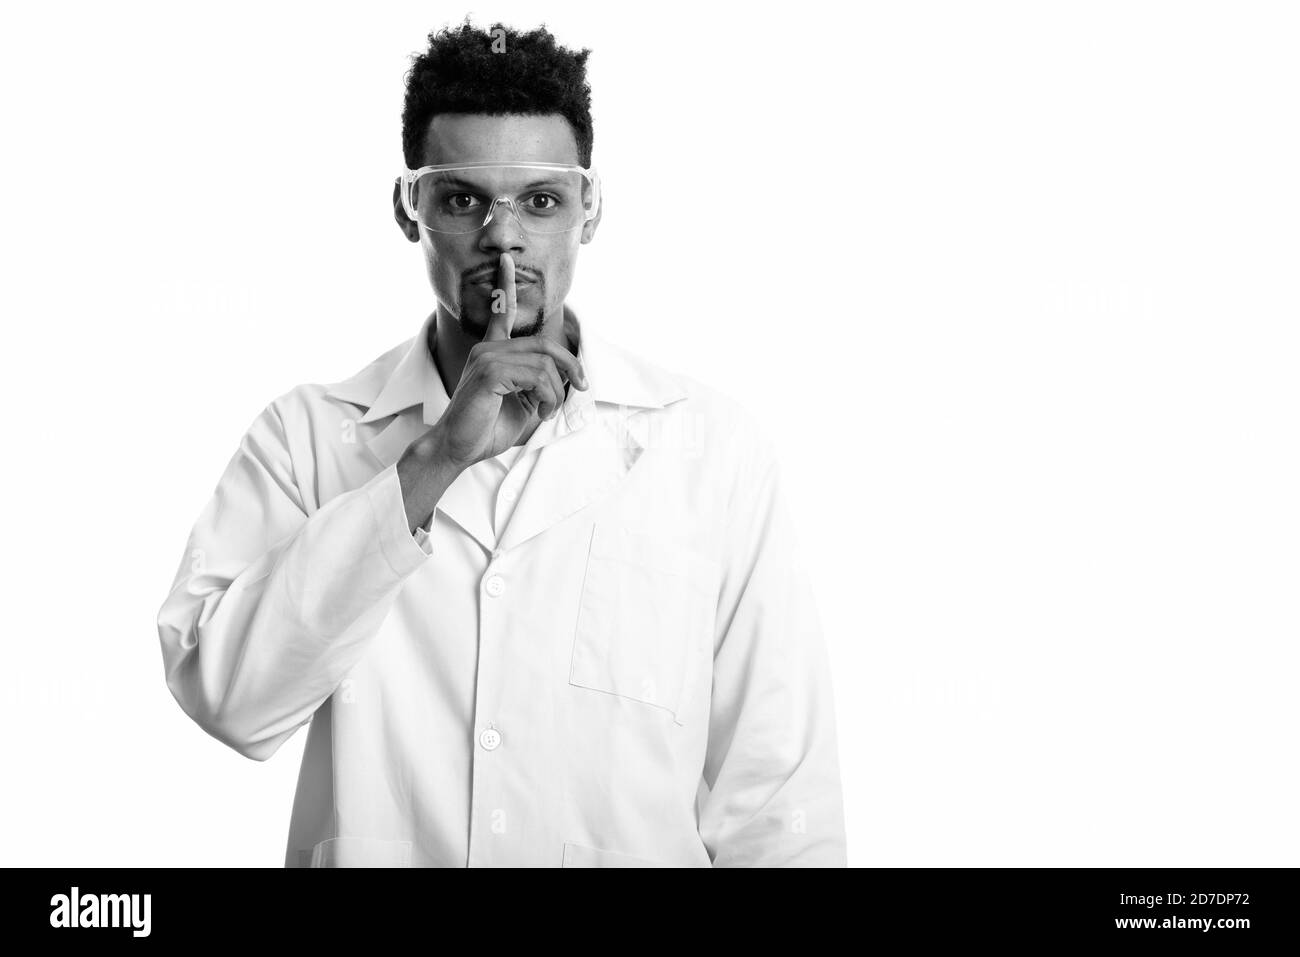 Studio shot of young African man doctor with finger on lips Stock Photo